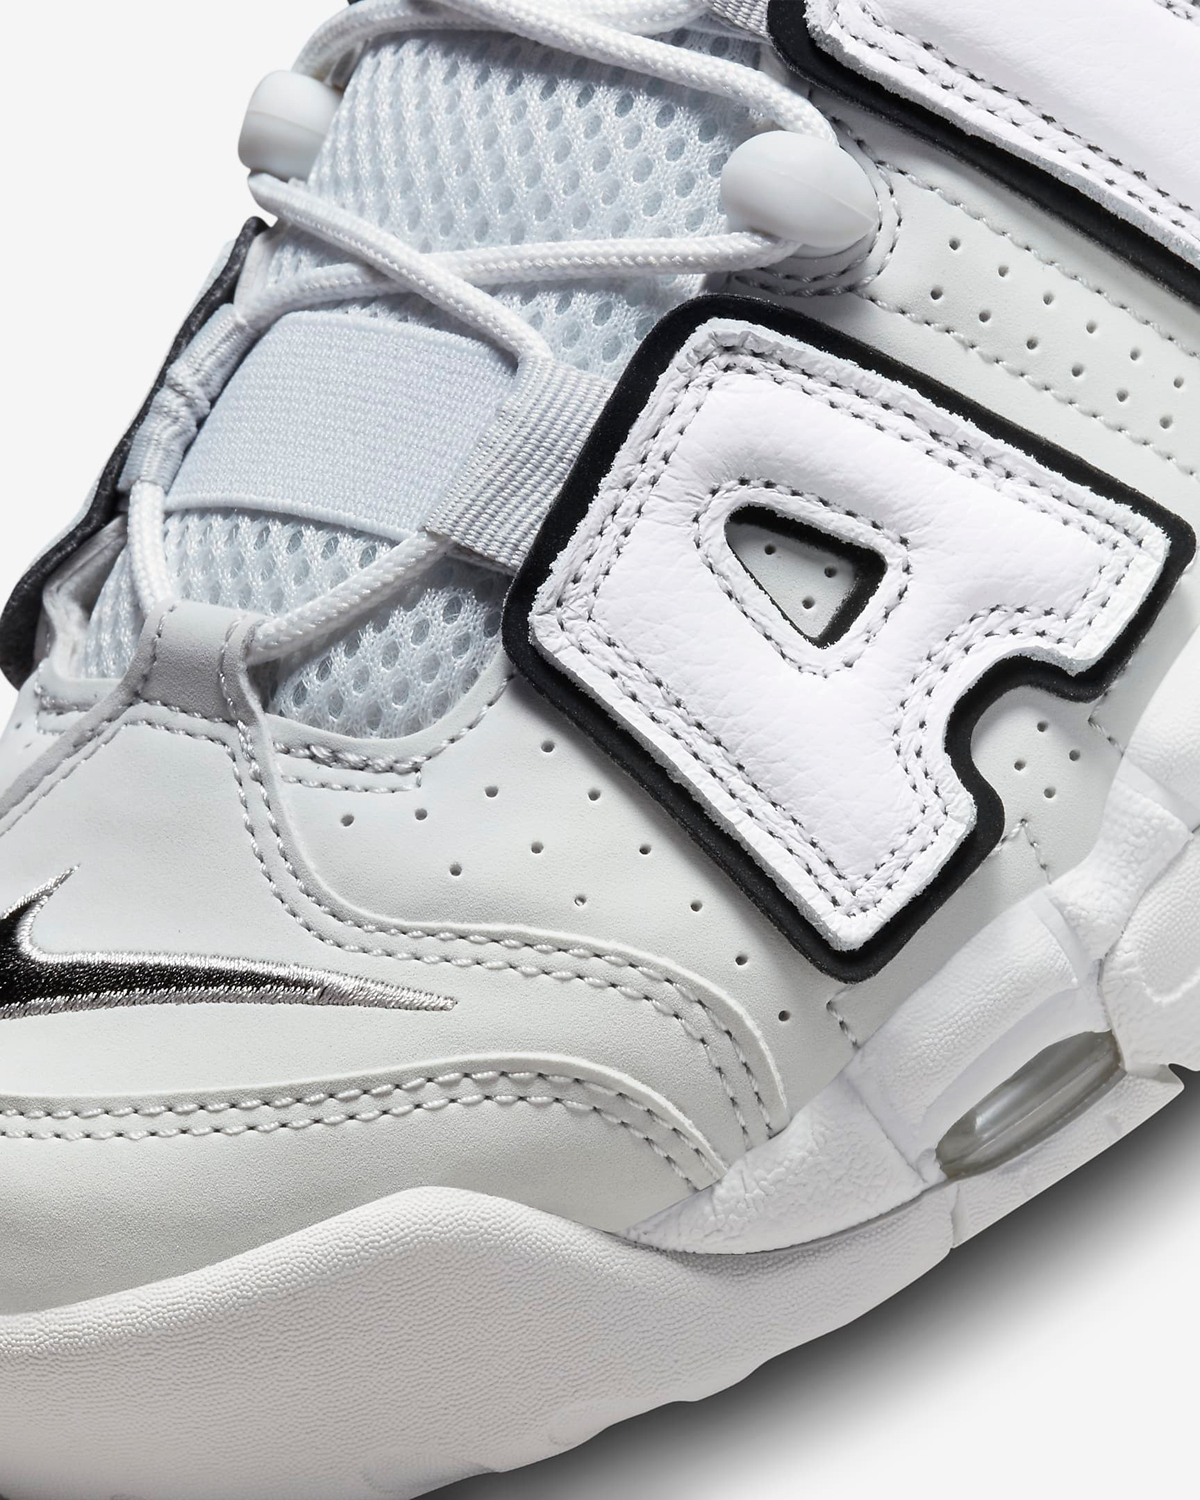 Nike-Air-More-Uptempo-96-Photon-Dust-7